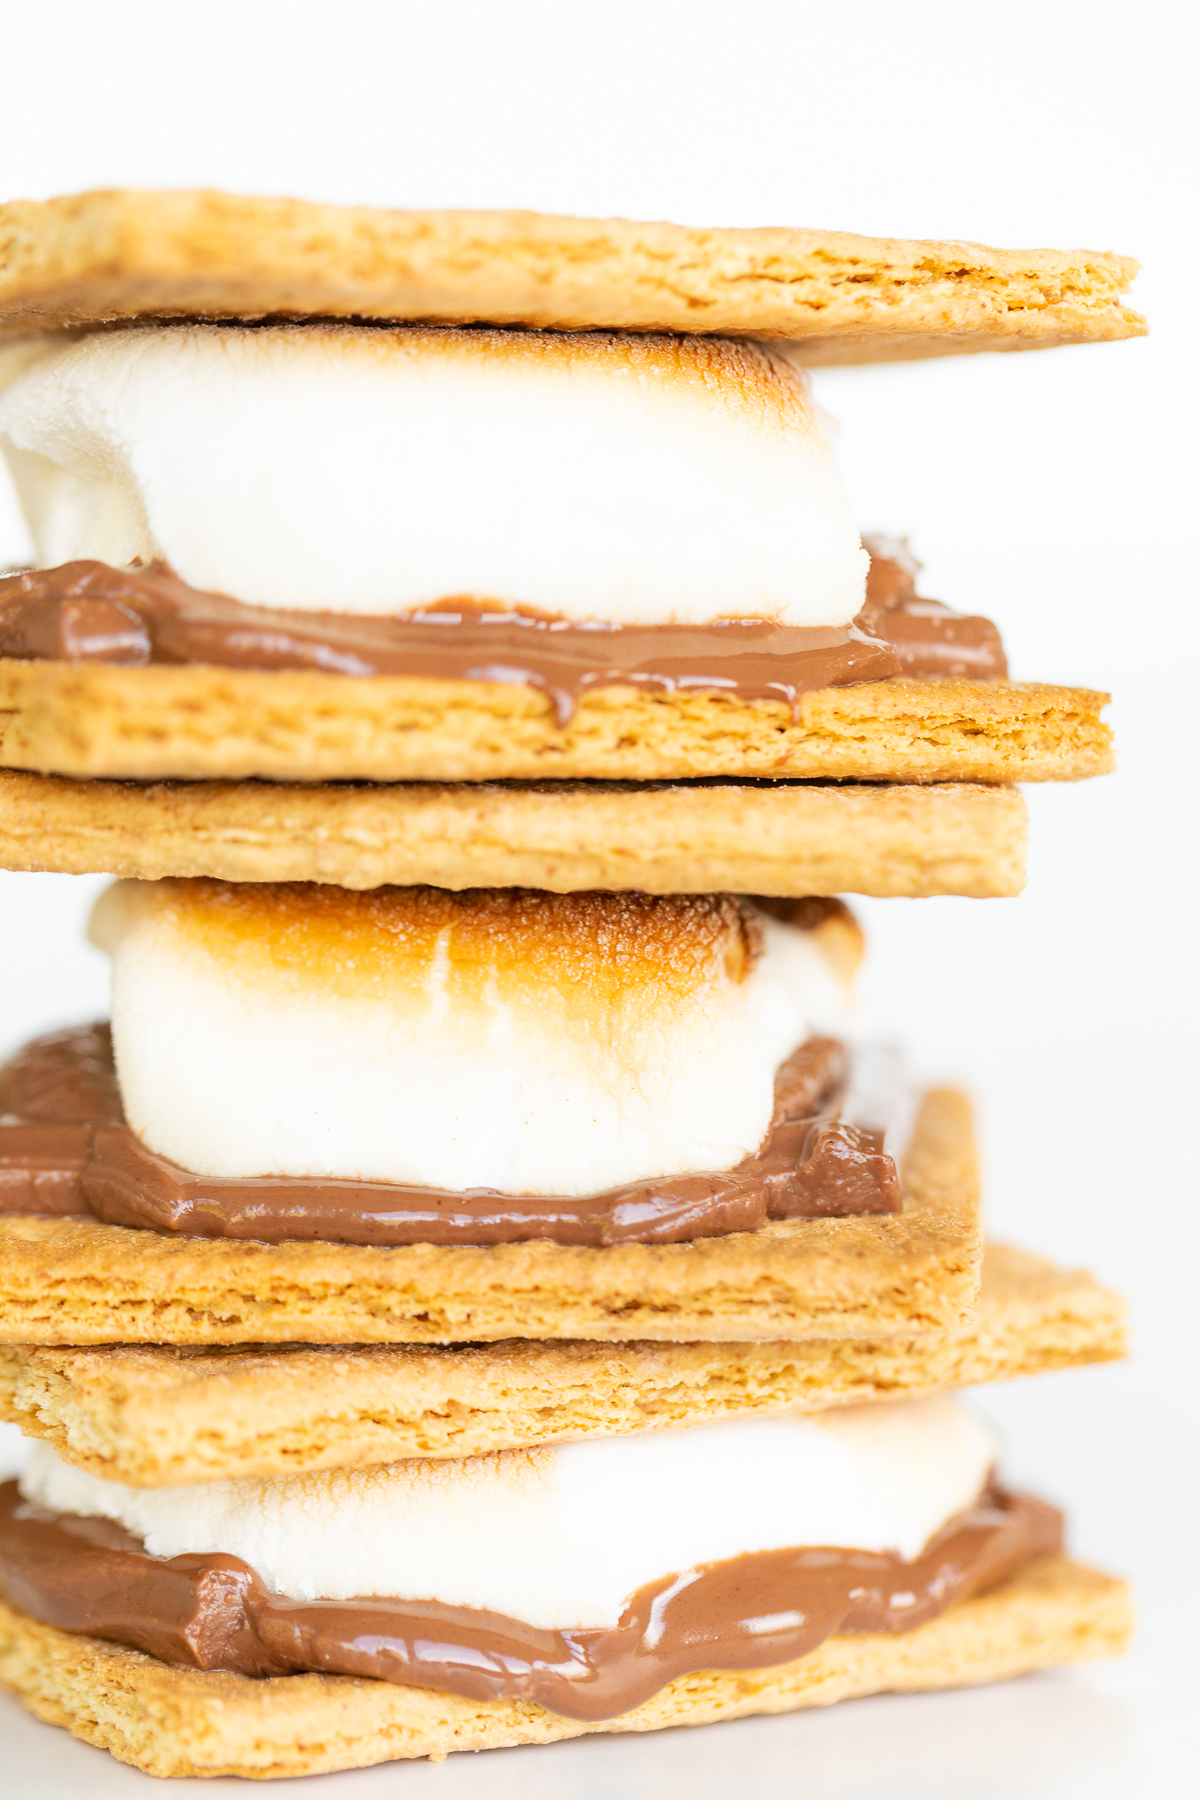 Oven-baked s'mores with a delightful stack of chocolate and marshmallows.